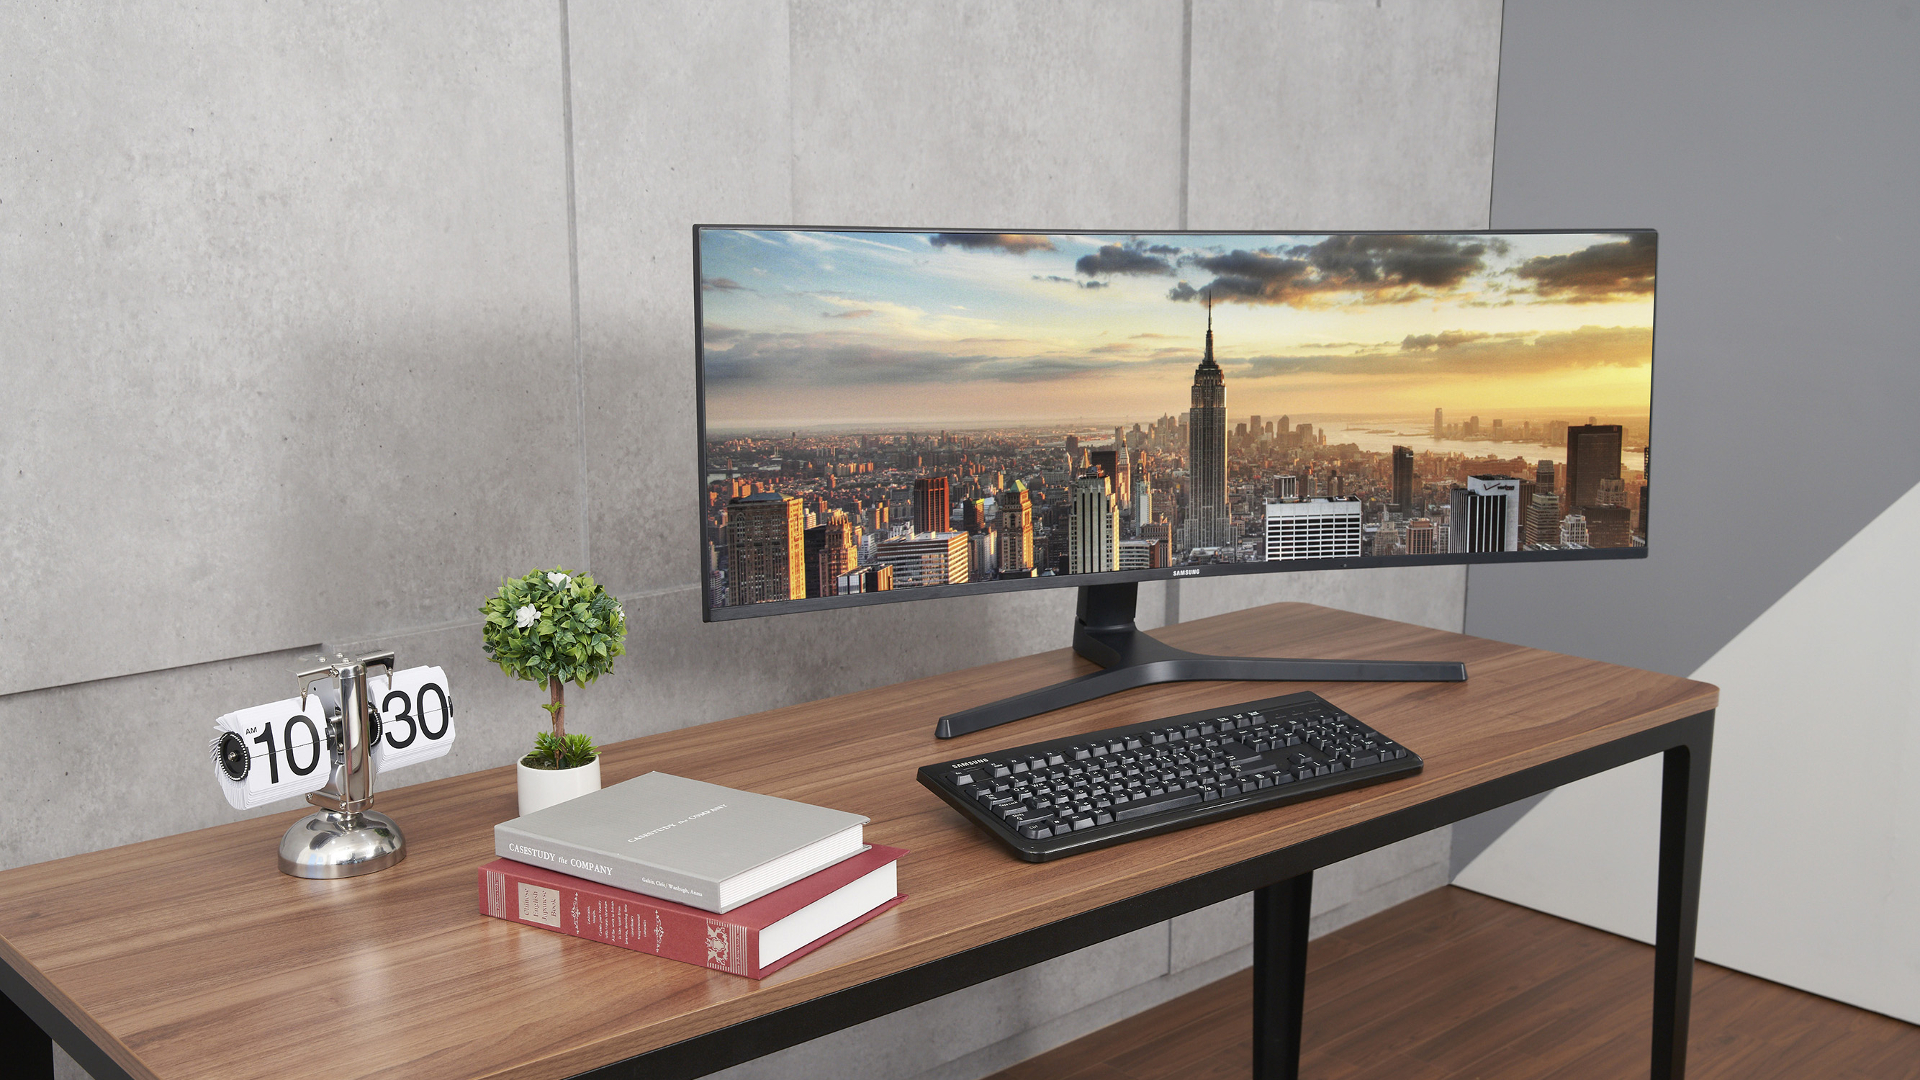 Samsung S 34 Inch Ultra Wide Curved Monitor Boasts Thunderbolt 3